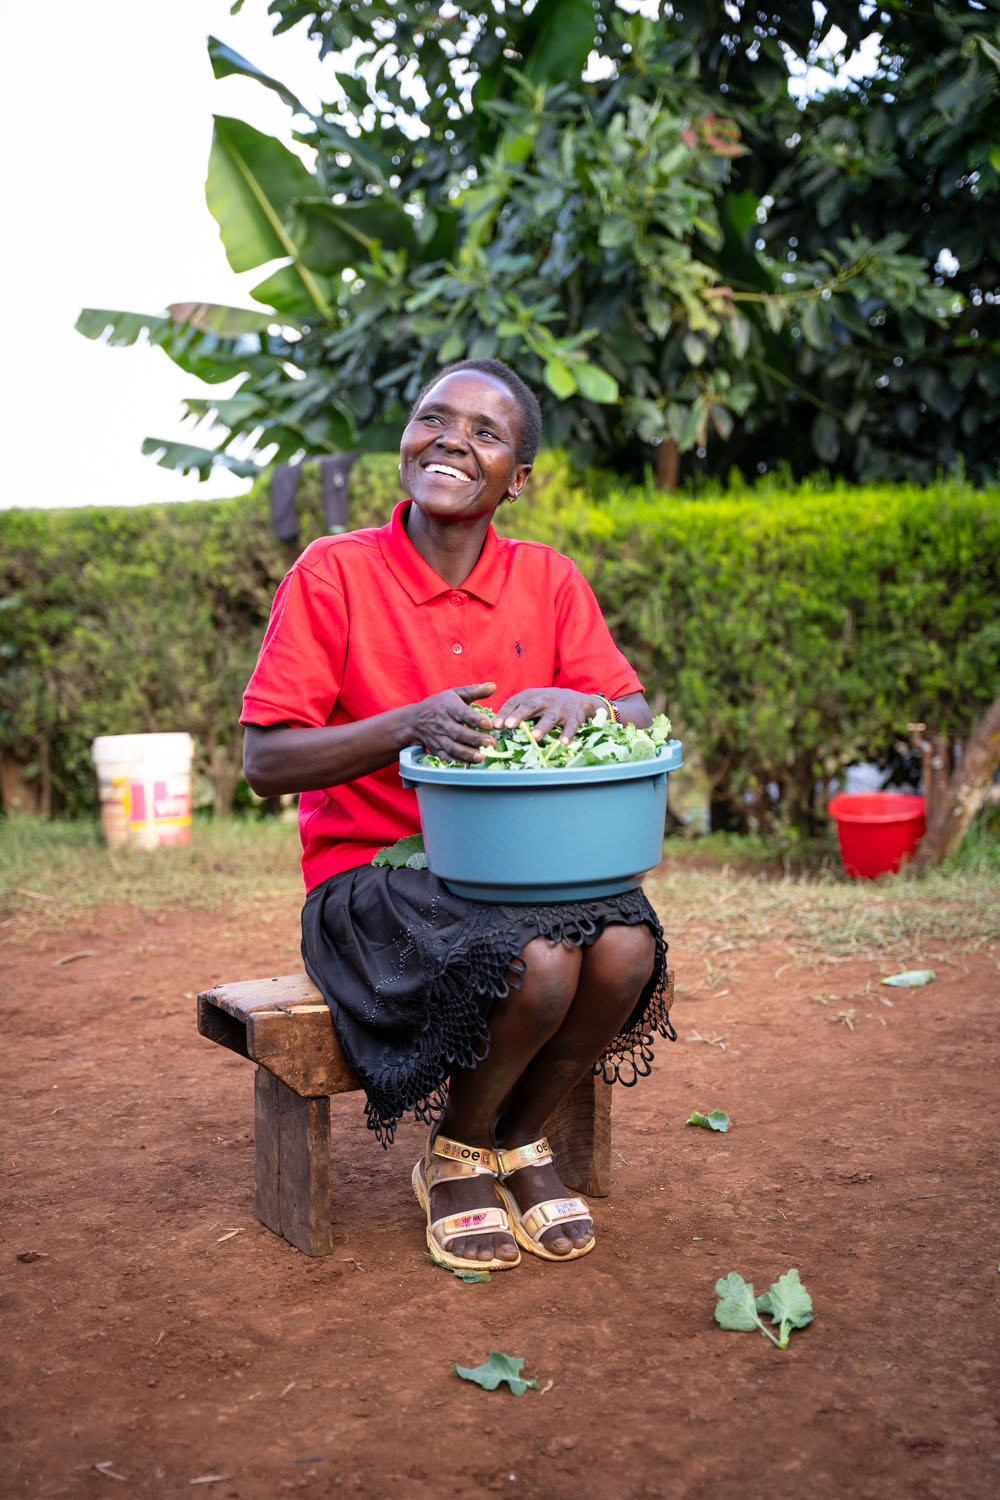 A Kenyan woman wearing a red polo shirt and black skirt sits on bench, sifting through vegetables in a basin. 